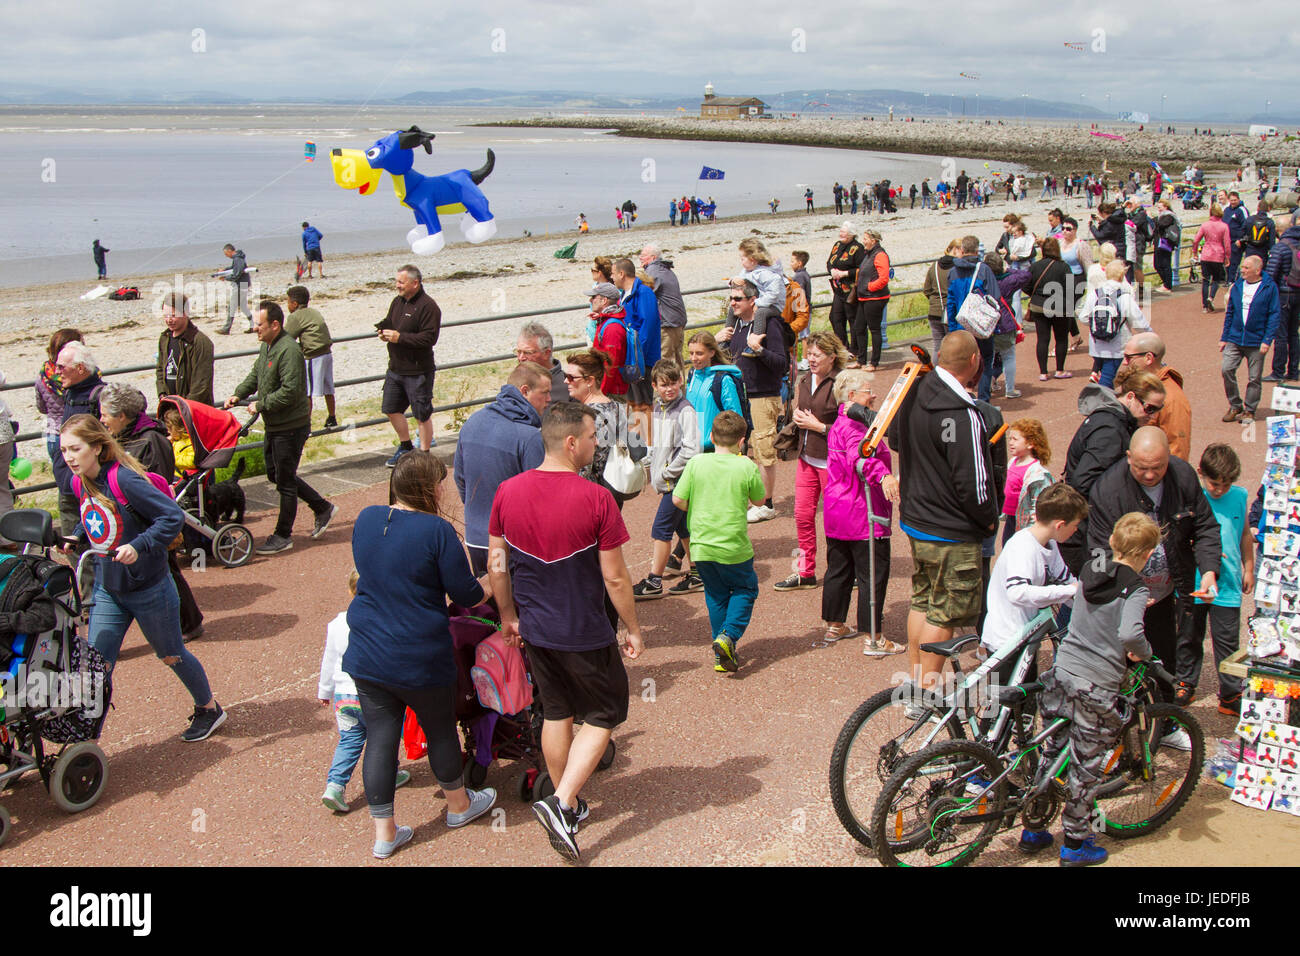 People watching Kite Festival in Morecambe, Lancashire, UK. June, 2015. UK Weather. Strong winds on the coast as Kite Flyers struggle to launch and retrieve their kites.The Midland Hotel Catch The Wind Kite Festival is an annual event on Morecambe seafront, when for the whole day the skies are full of the most spectacular shapes, colours and creations. Credit:MediaWorldImages/AlamyLiveNews Stock Photo